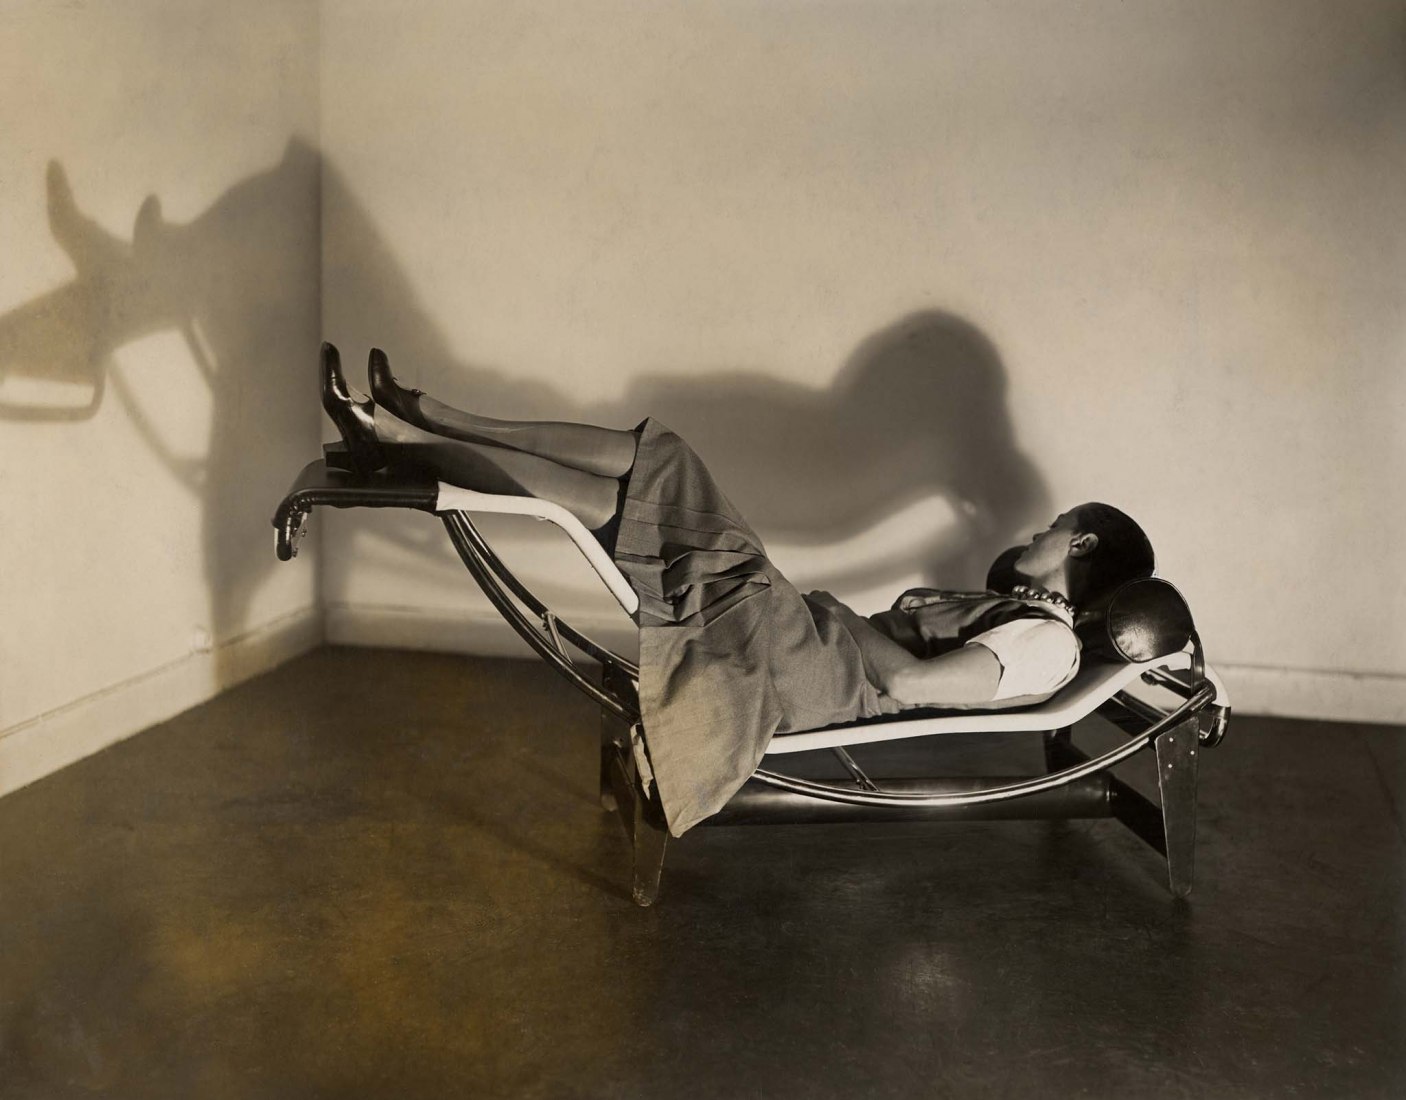 Charlotte Perriand on the chaise longue basculante B306, 1929 © AChP/ © ADAGP, Paris and DACS, London 2021. Courtesy by The Design Museum.